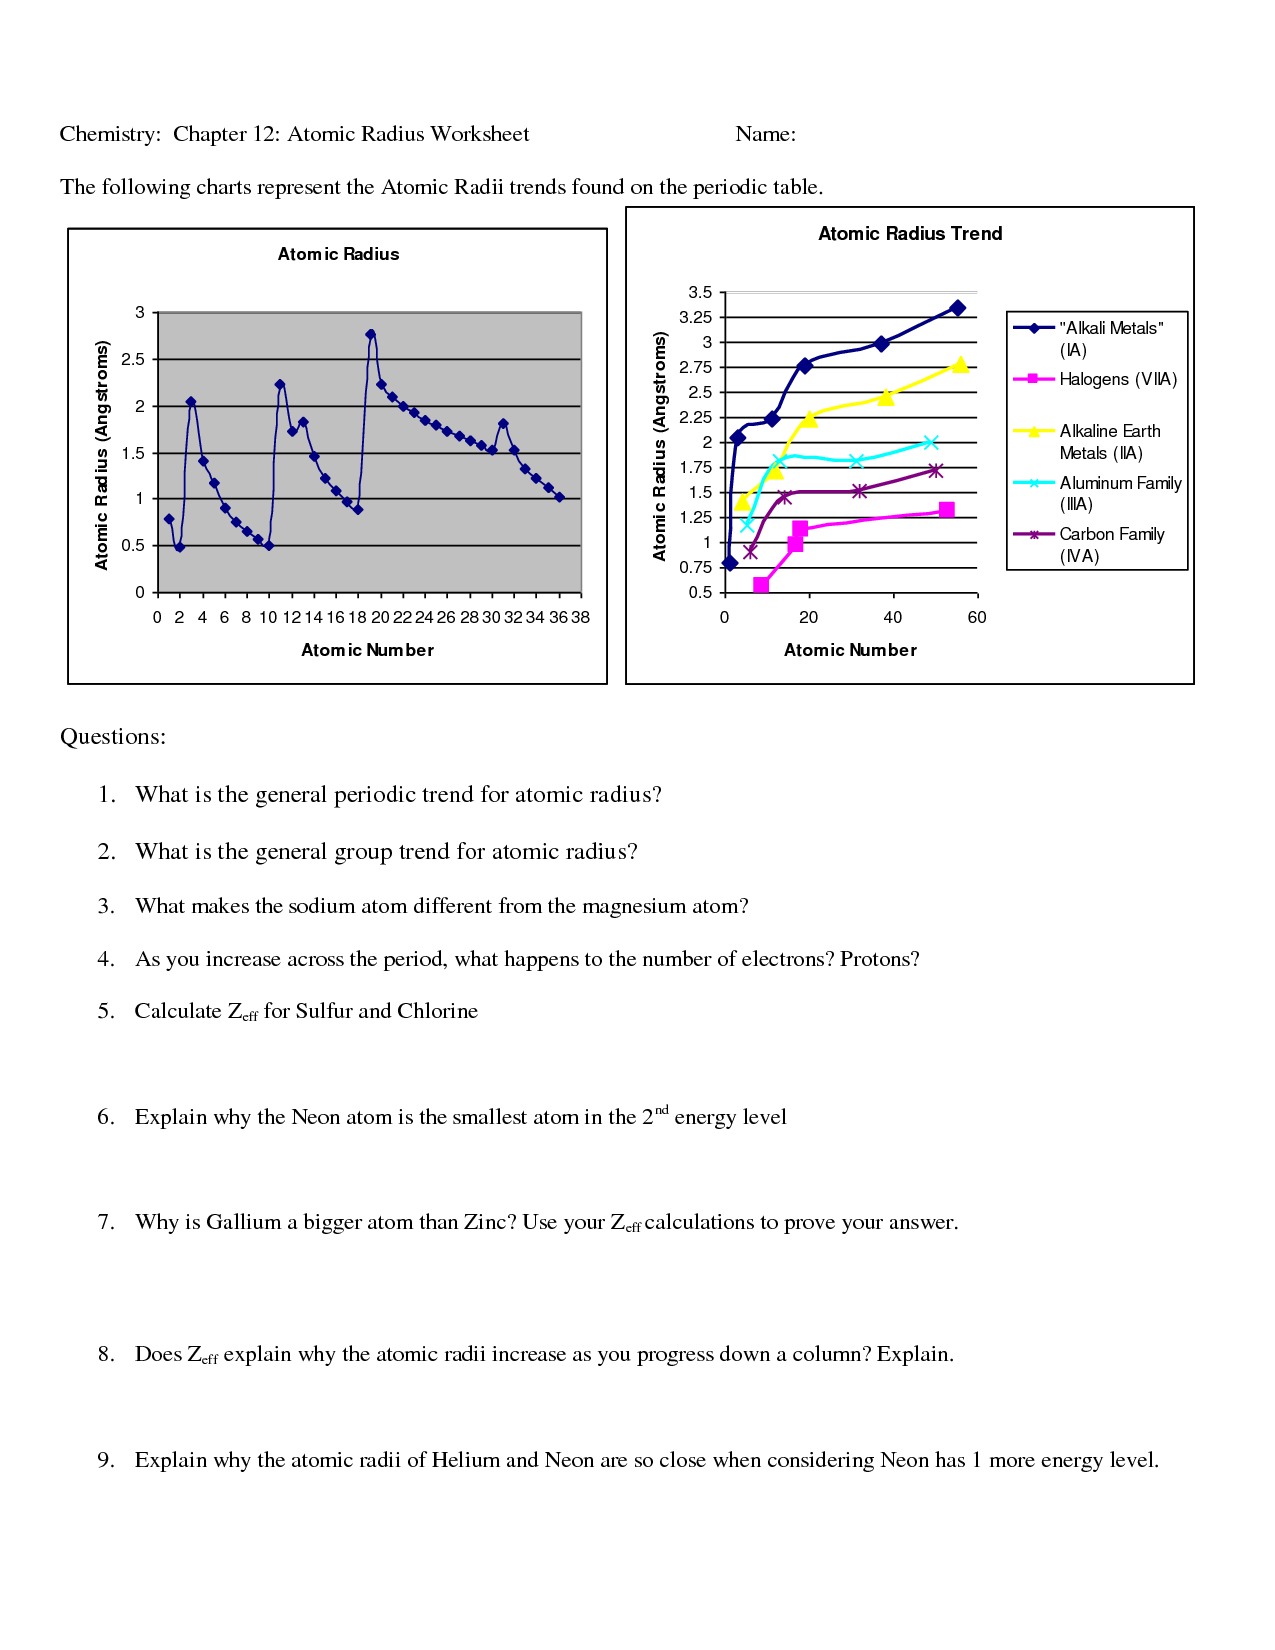 11-best-images-of-periodic-trends-worksheet-with-answers-periodic